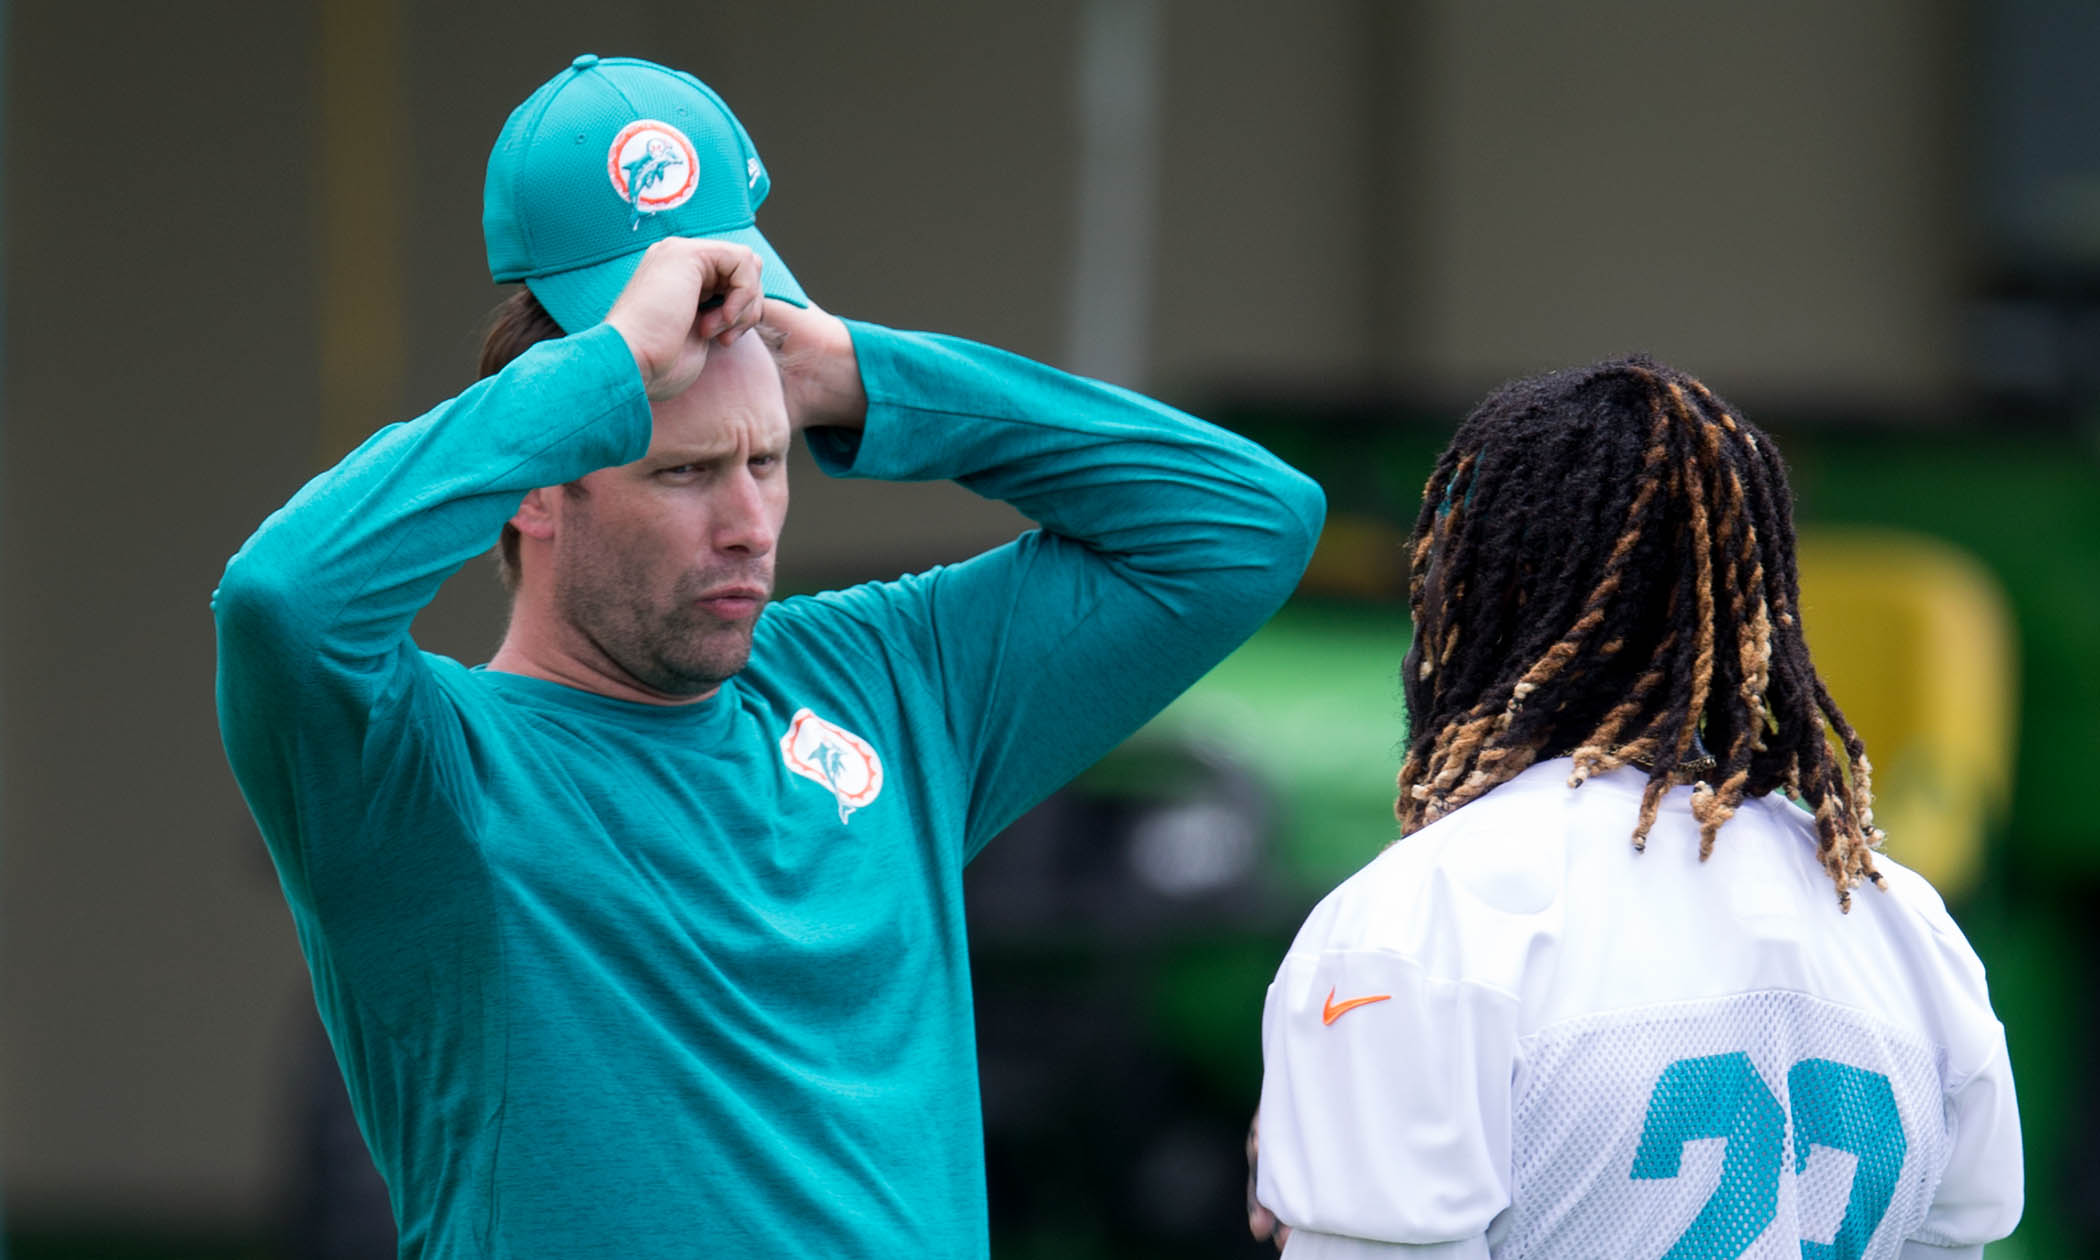 Gase has proved to be strong enough to make the hard decisions, but will they prove to be smart as well?